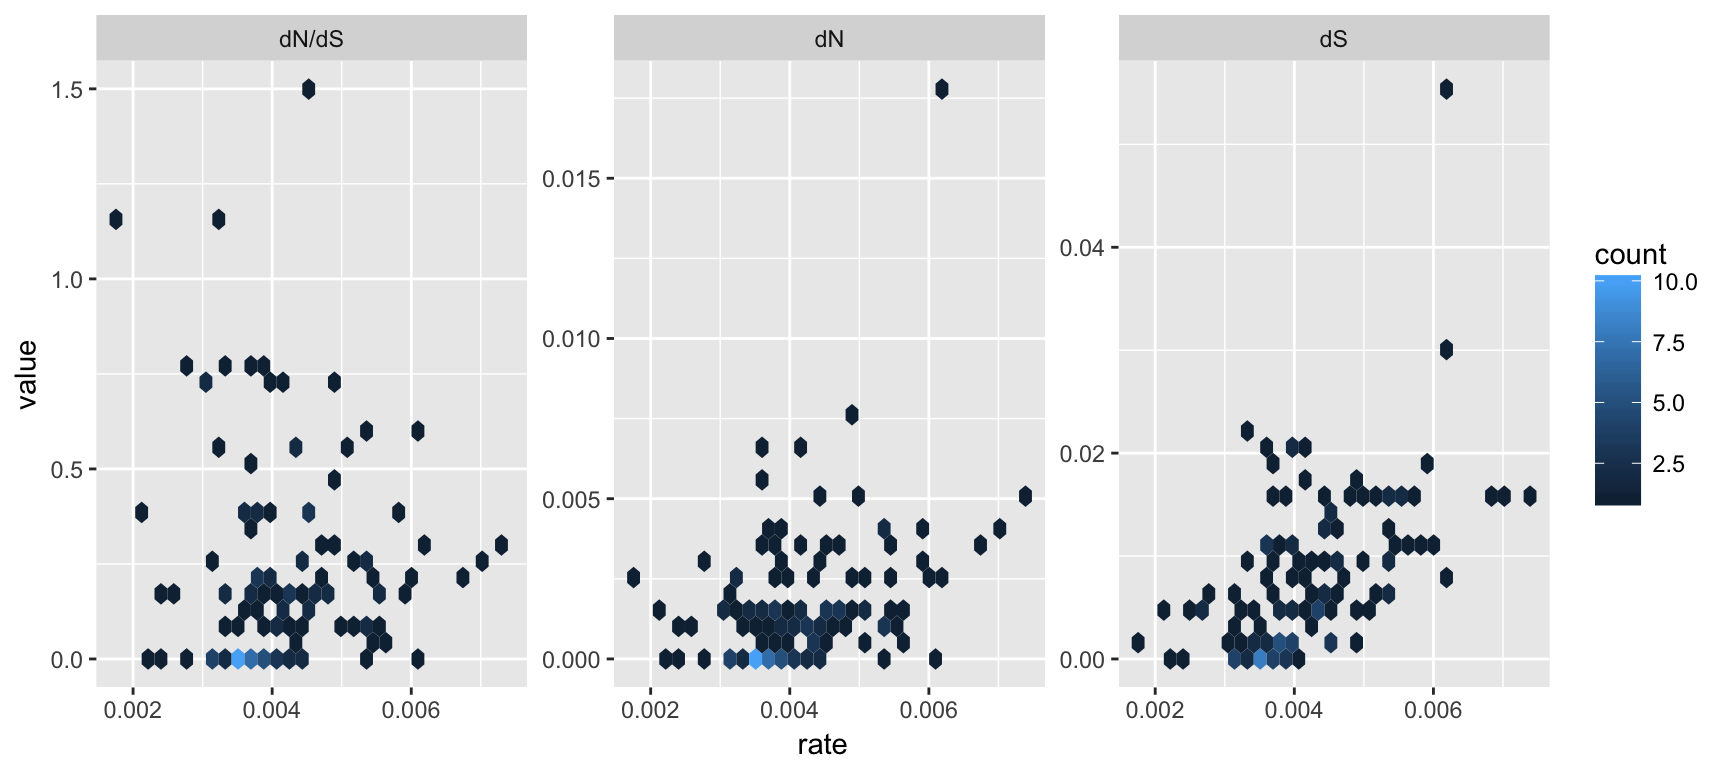 Correlation of dN/dS, dN and dS versus substitution rate. After merging the BEAST and CodeML outputs, the branch-specific estimates (substitution rate, dN/dS , dN and dS) from the two analysis programs are compared on the same branch basis. The associations of dN/dS, dN and dS vs. rate are visualized in hexbin scatter plots.